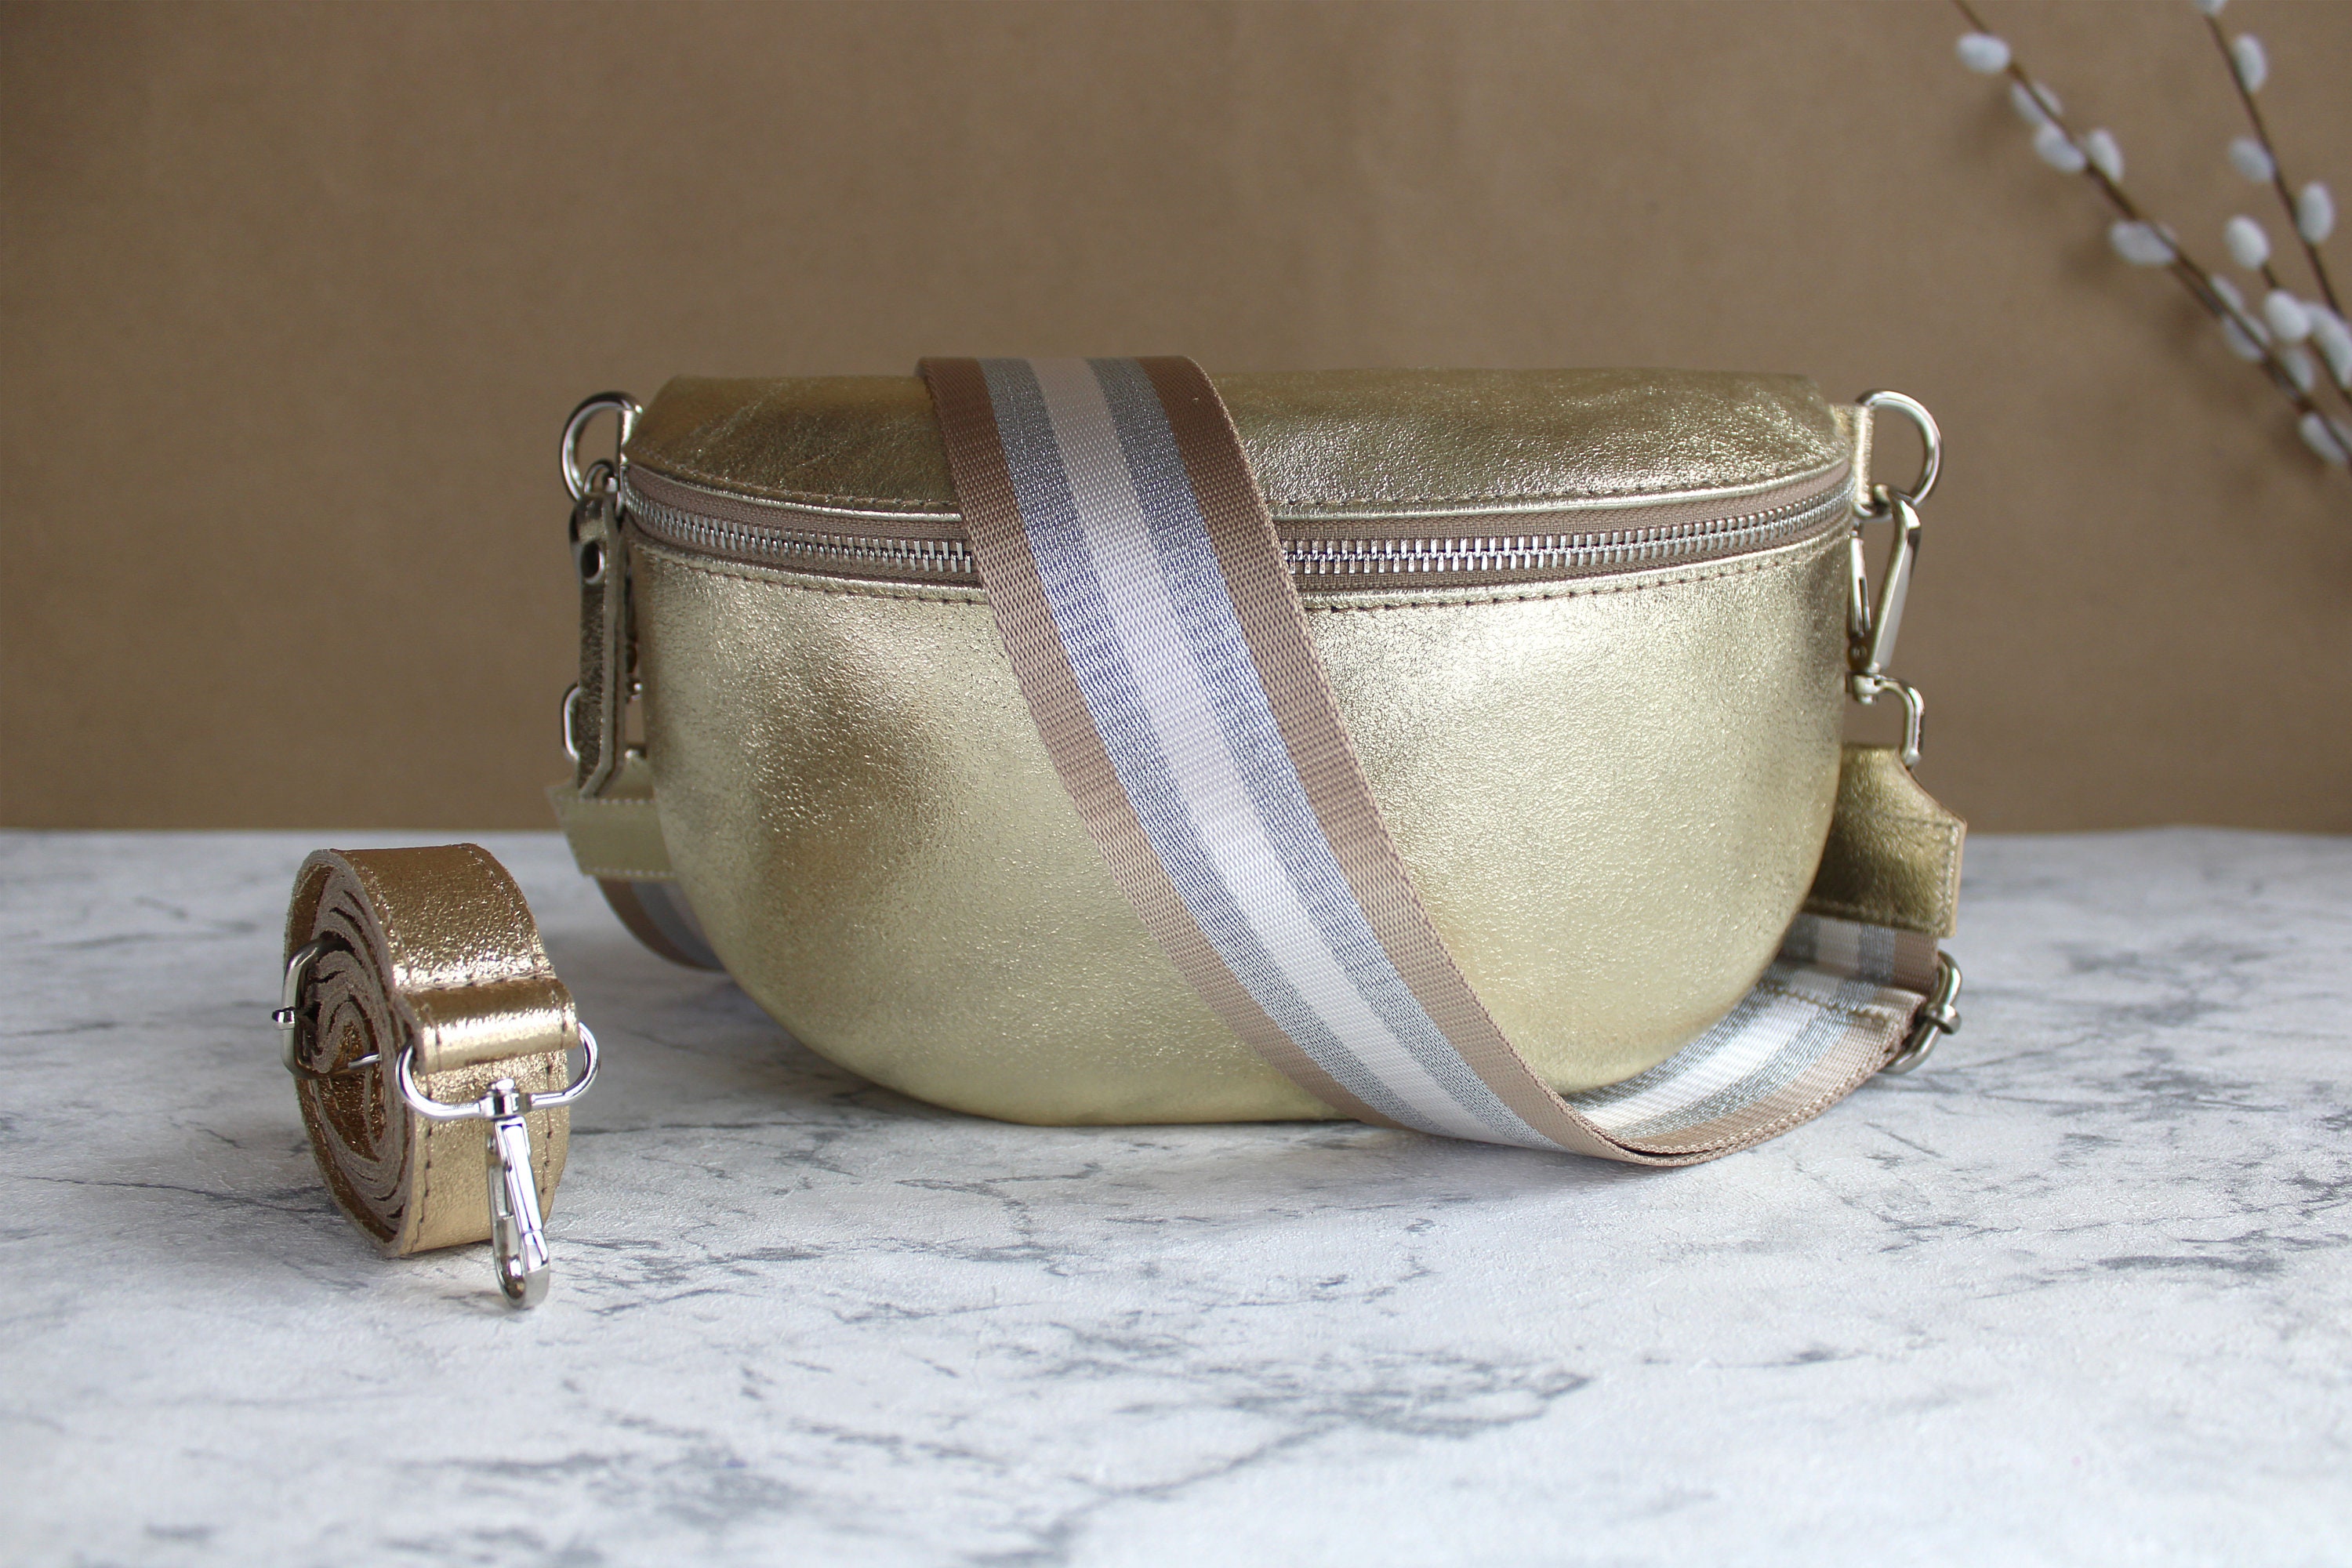 Gold-colored Leather Waist Bag for Women With Patterned Strap 